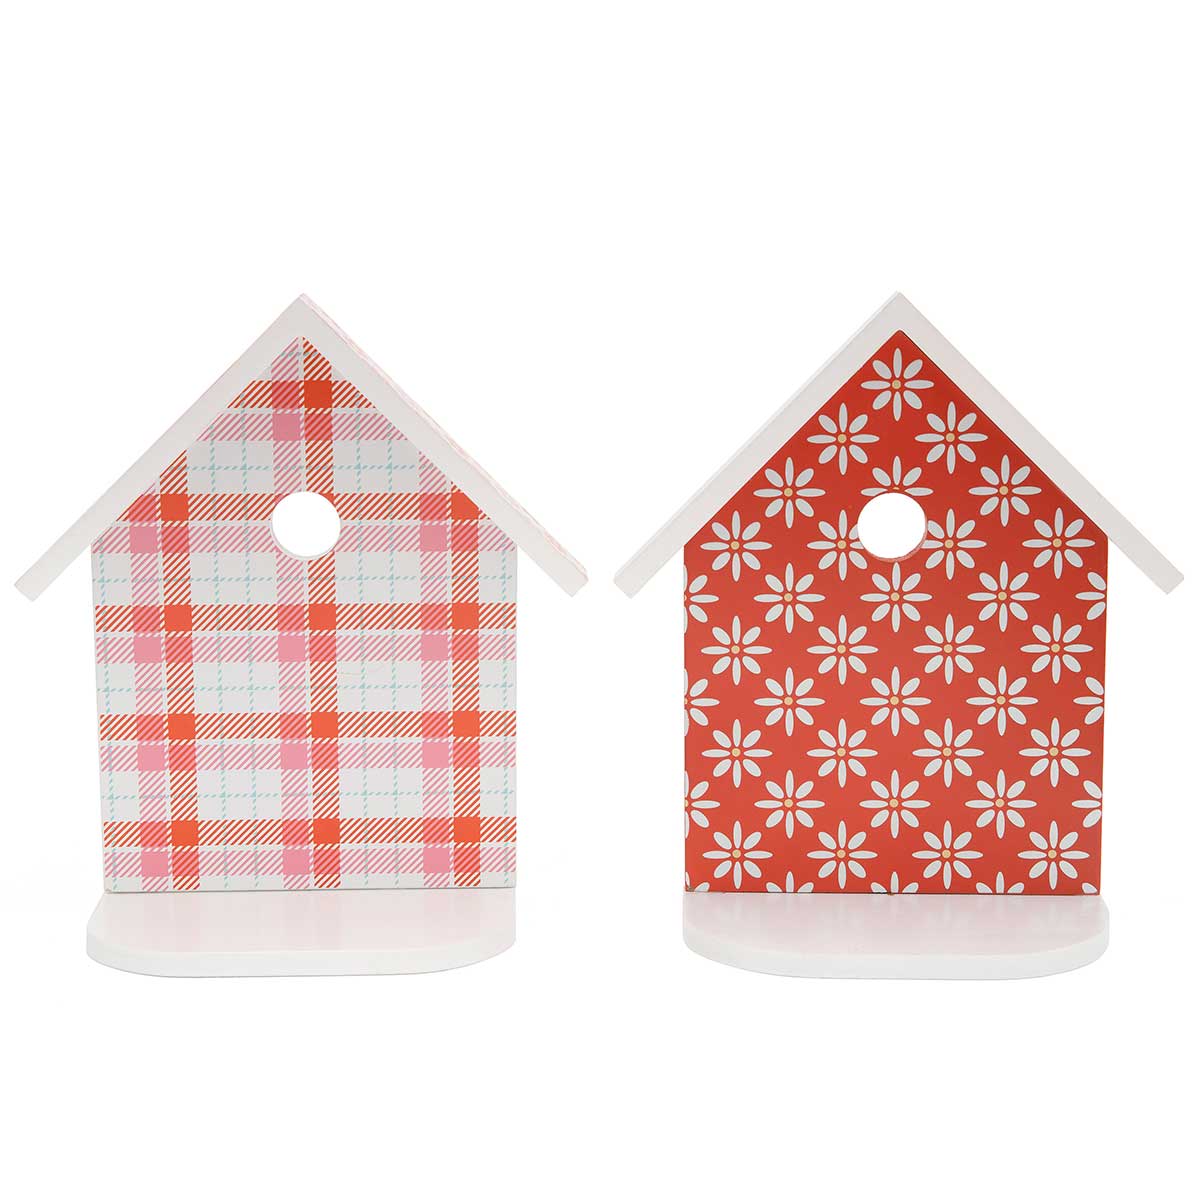 CORAL FAIR WOOD BIRDHOUSE SIT-A-BOUT CORAL/WHITE/PINK